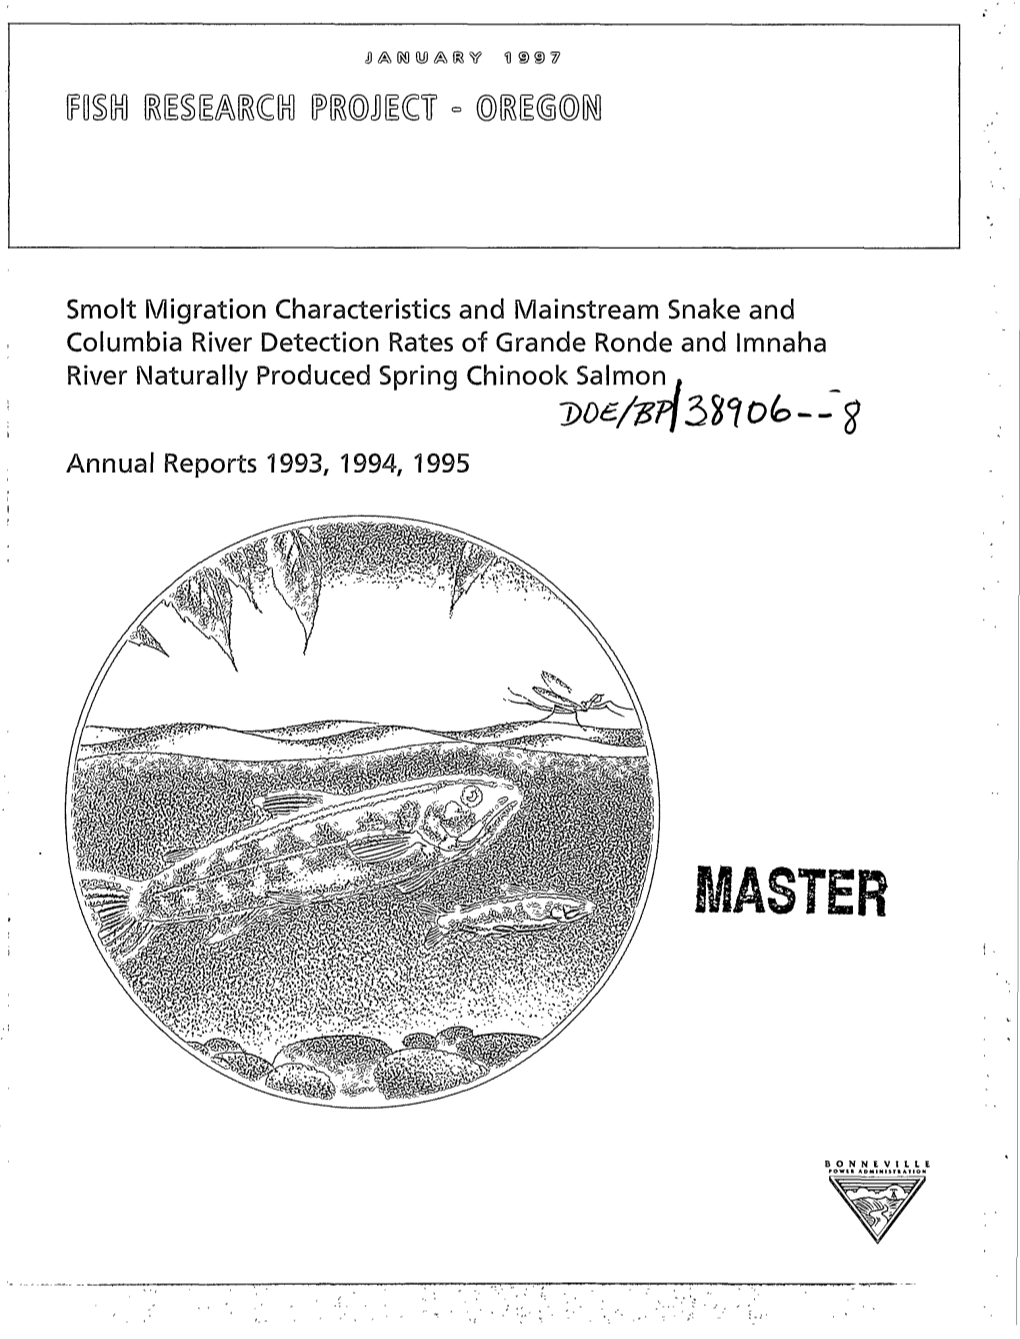 Smolt Migration Characteristics and Mainstream Snake and Columbia River Detection Rates of Grande Ronde and Imnaha River Naturally Produced Spring Chinook Salmon